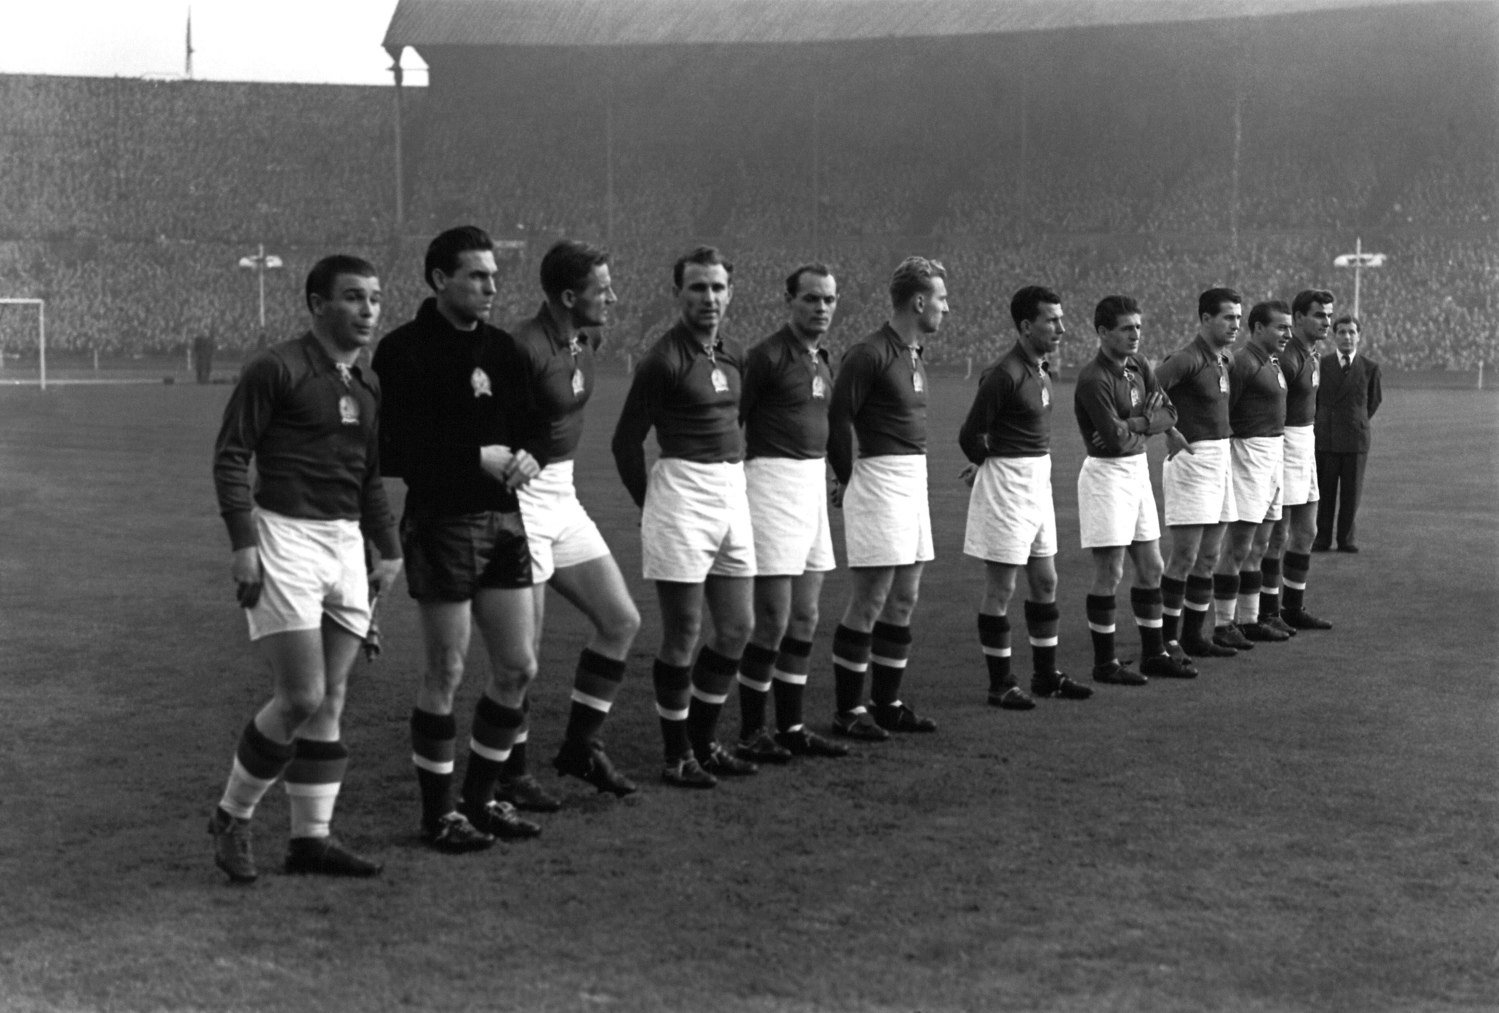 The Hungarian national team in 1953